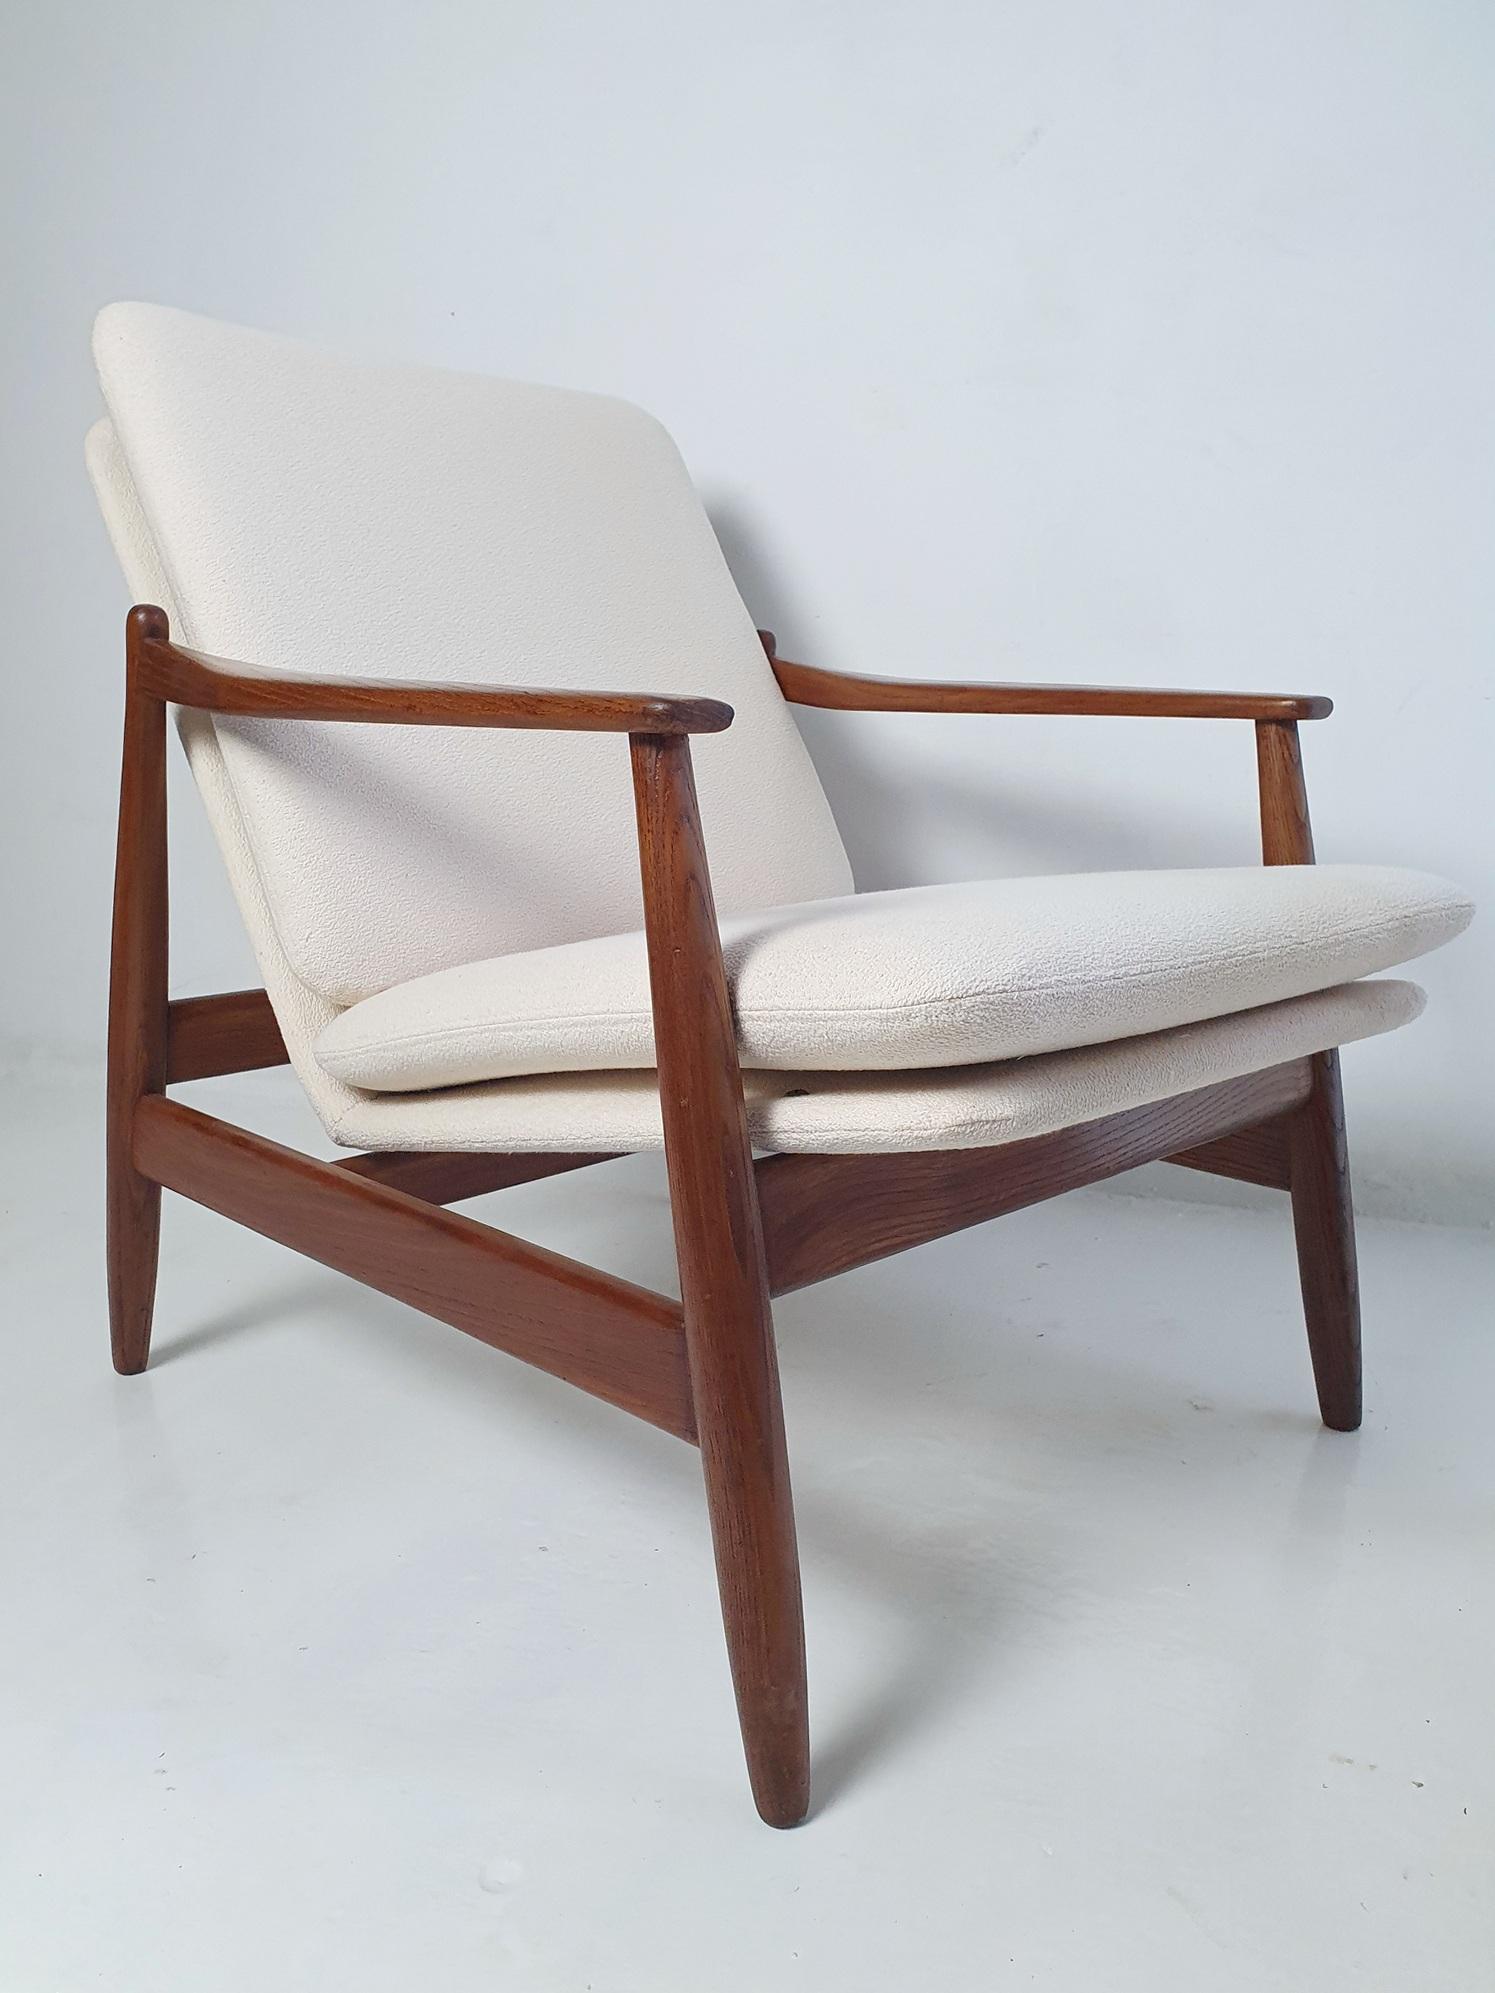 Midcentury Lounge Chairs by Pizzetti, Italy In Excellent Condition For Sale In Albano Laziale, Rome/Lazio